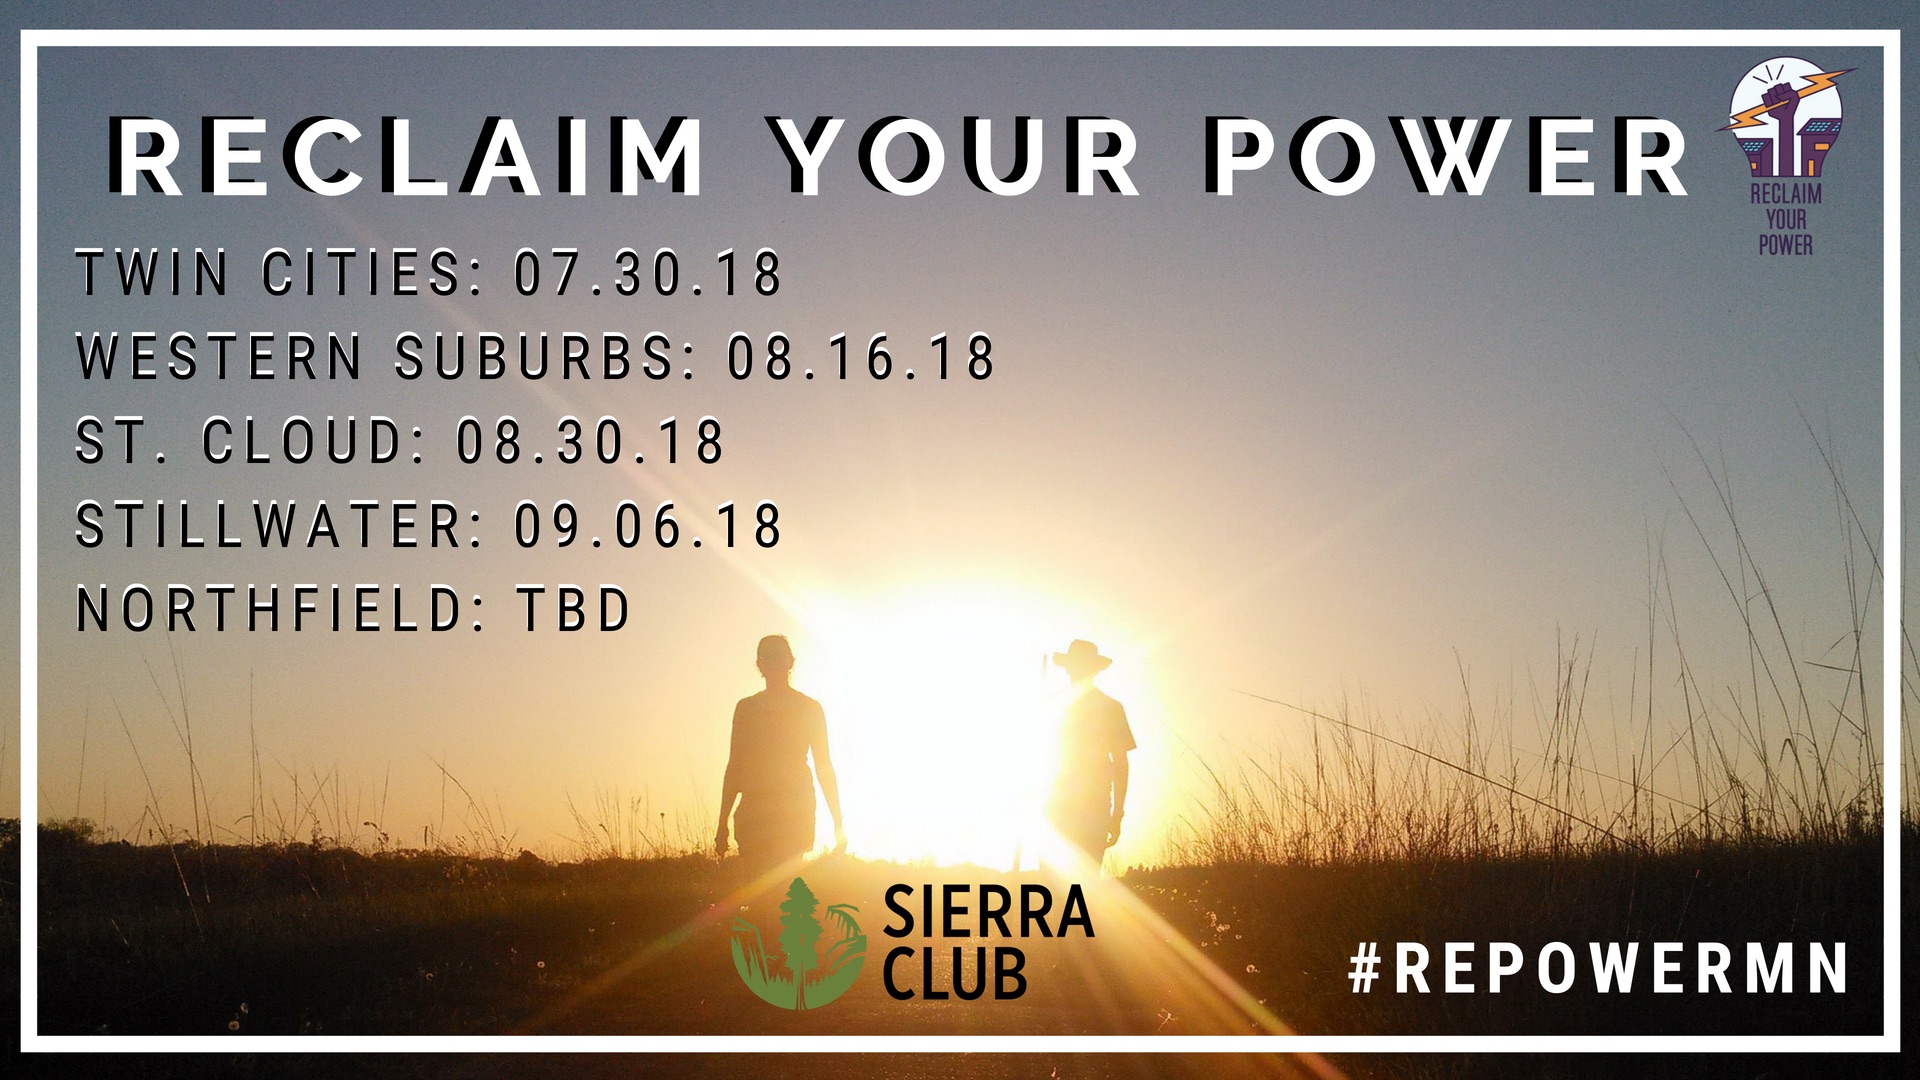 Reclaim Your Power event poster with dates